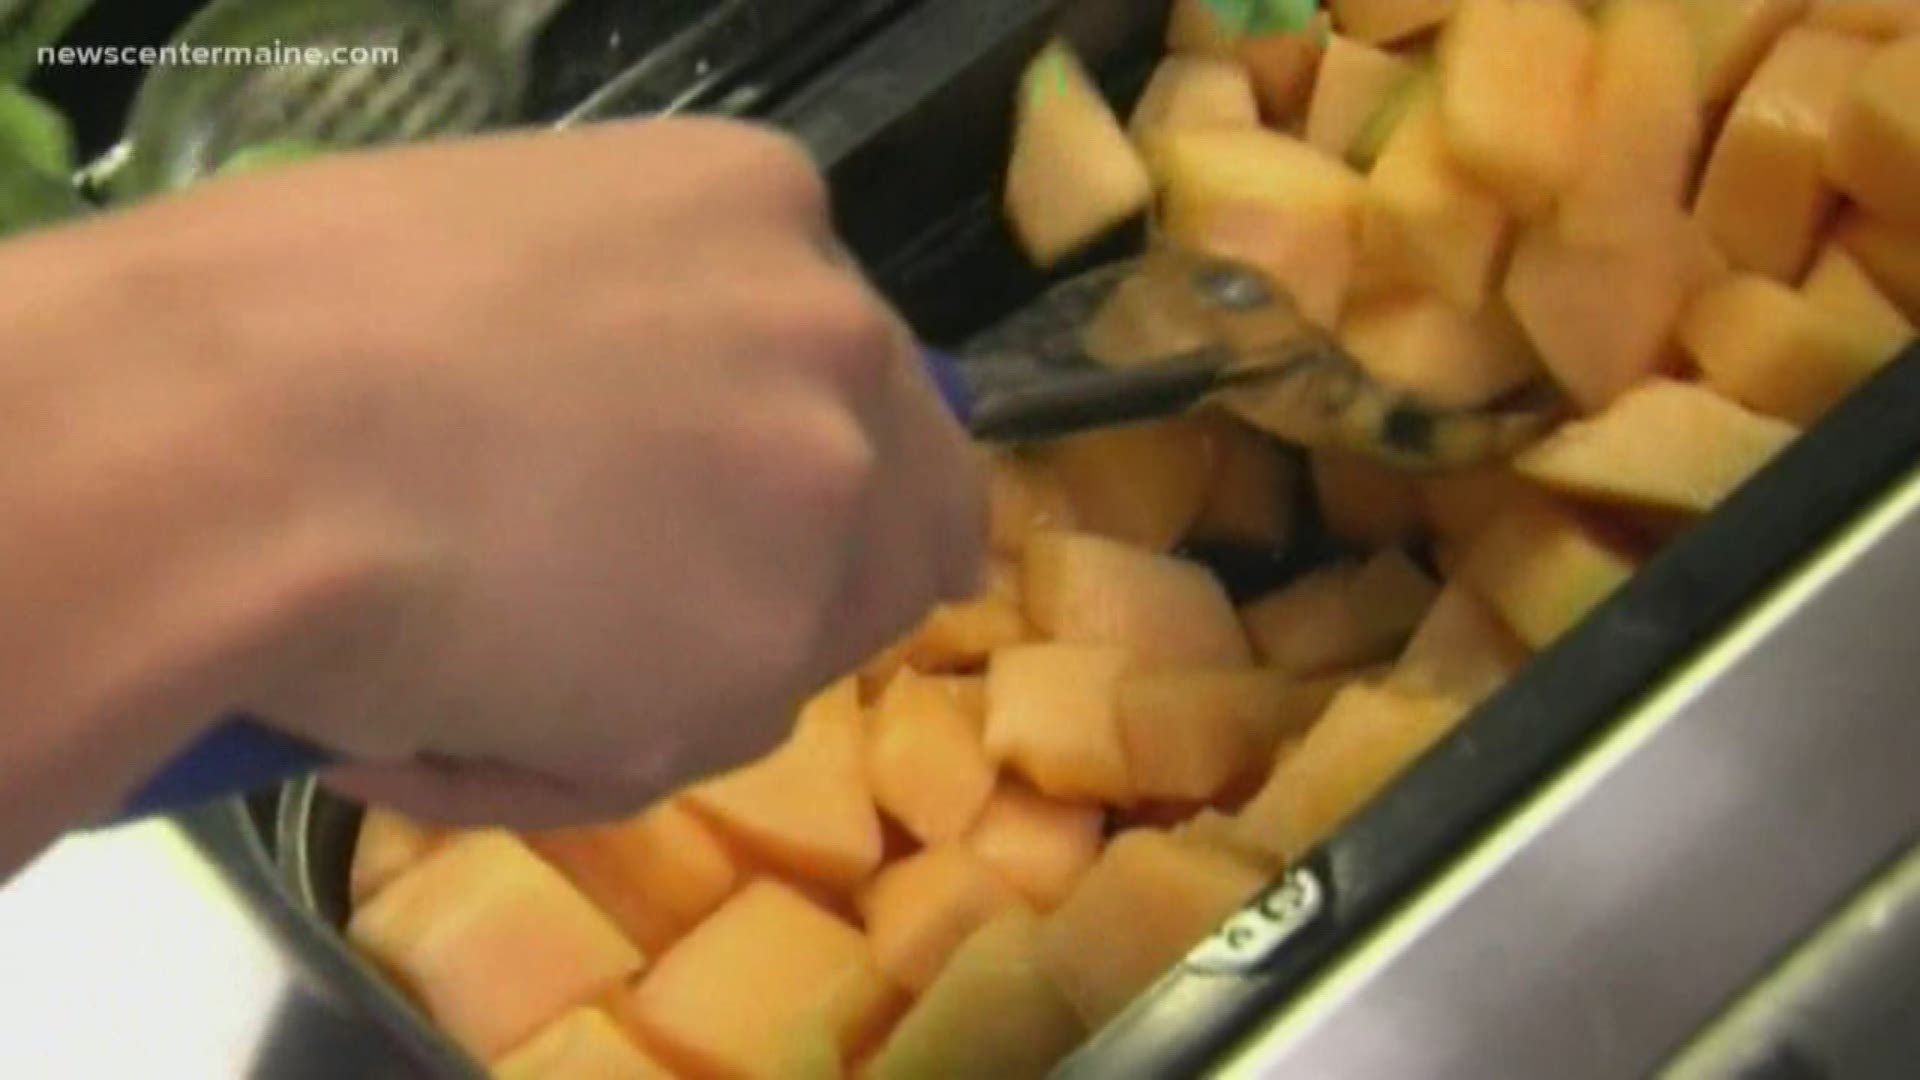 "Food shaming" remains a problem in the US and Maine has approved legislation today